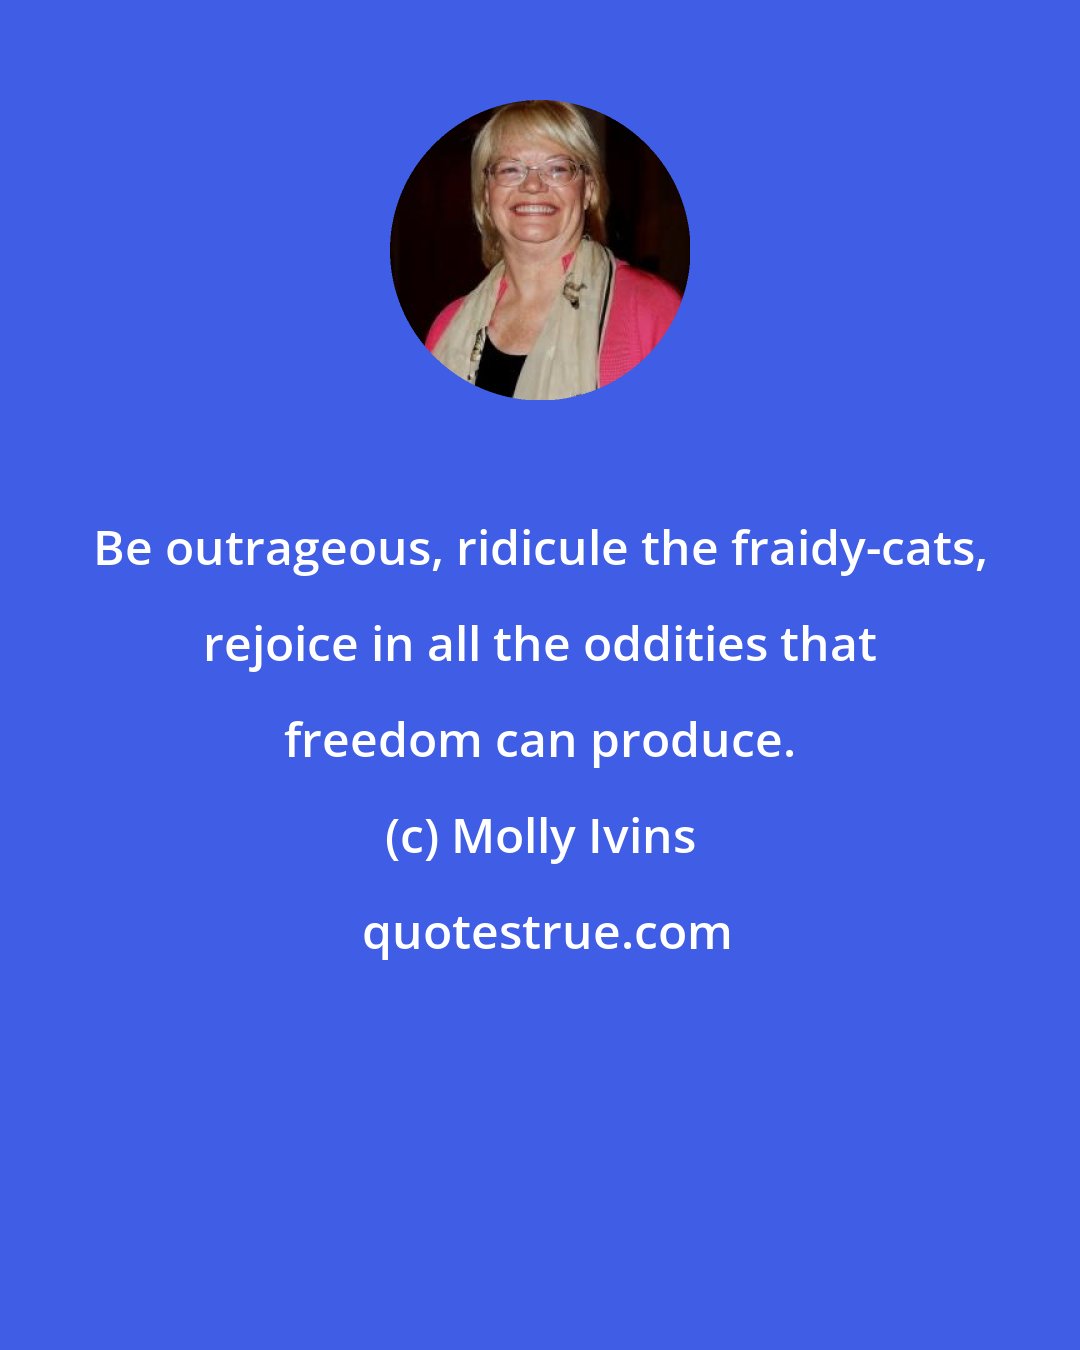 Molly Ivins: Be outrageous, ridicule the fraidy-cats, rejoice in all the oddities that freedom can produce.